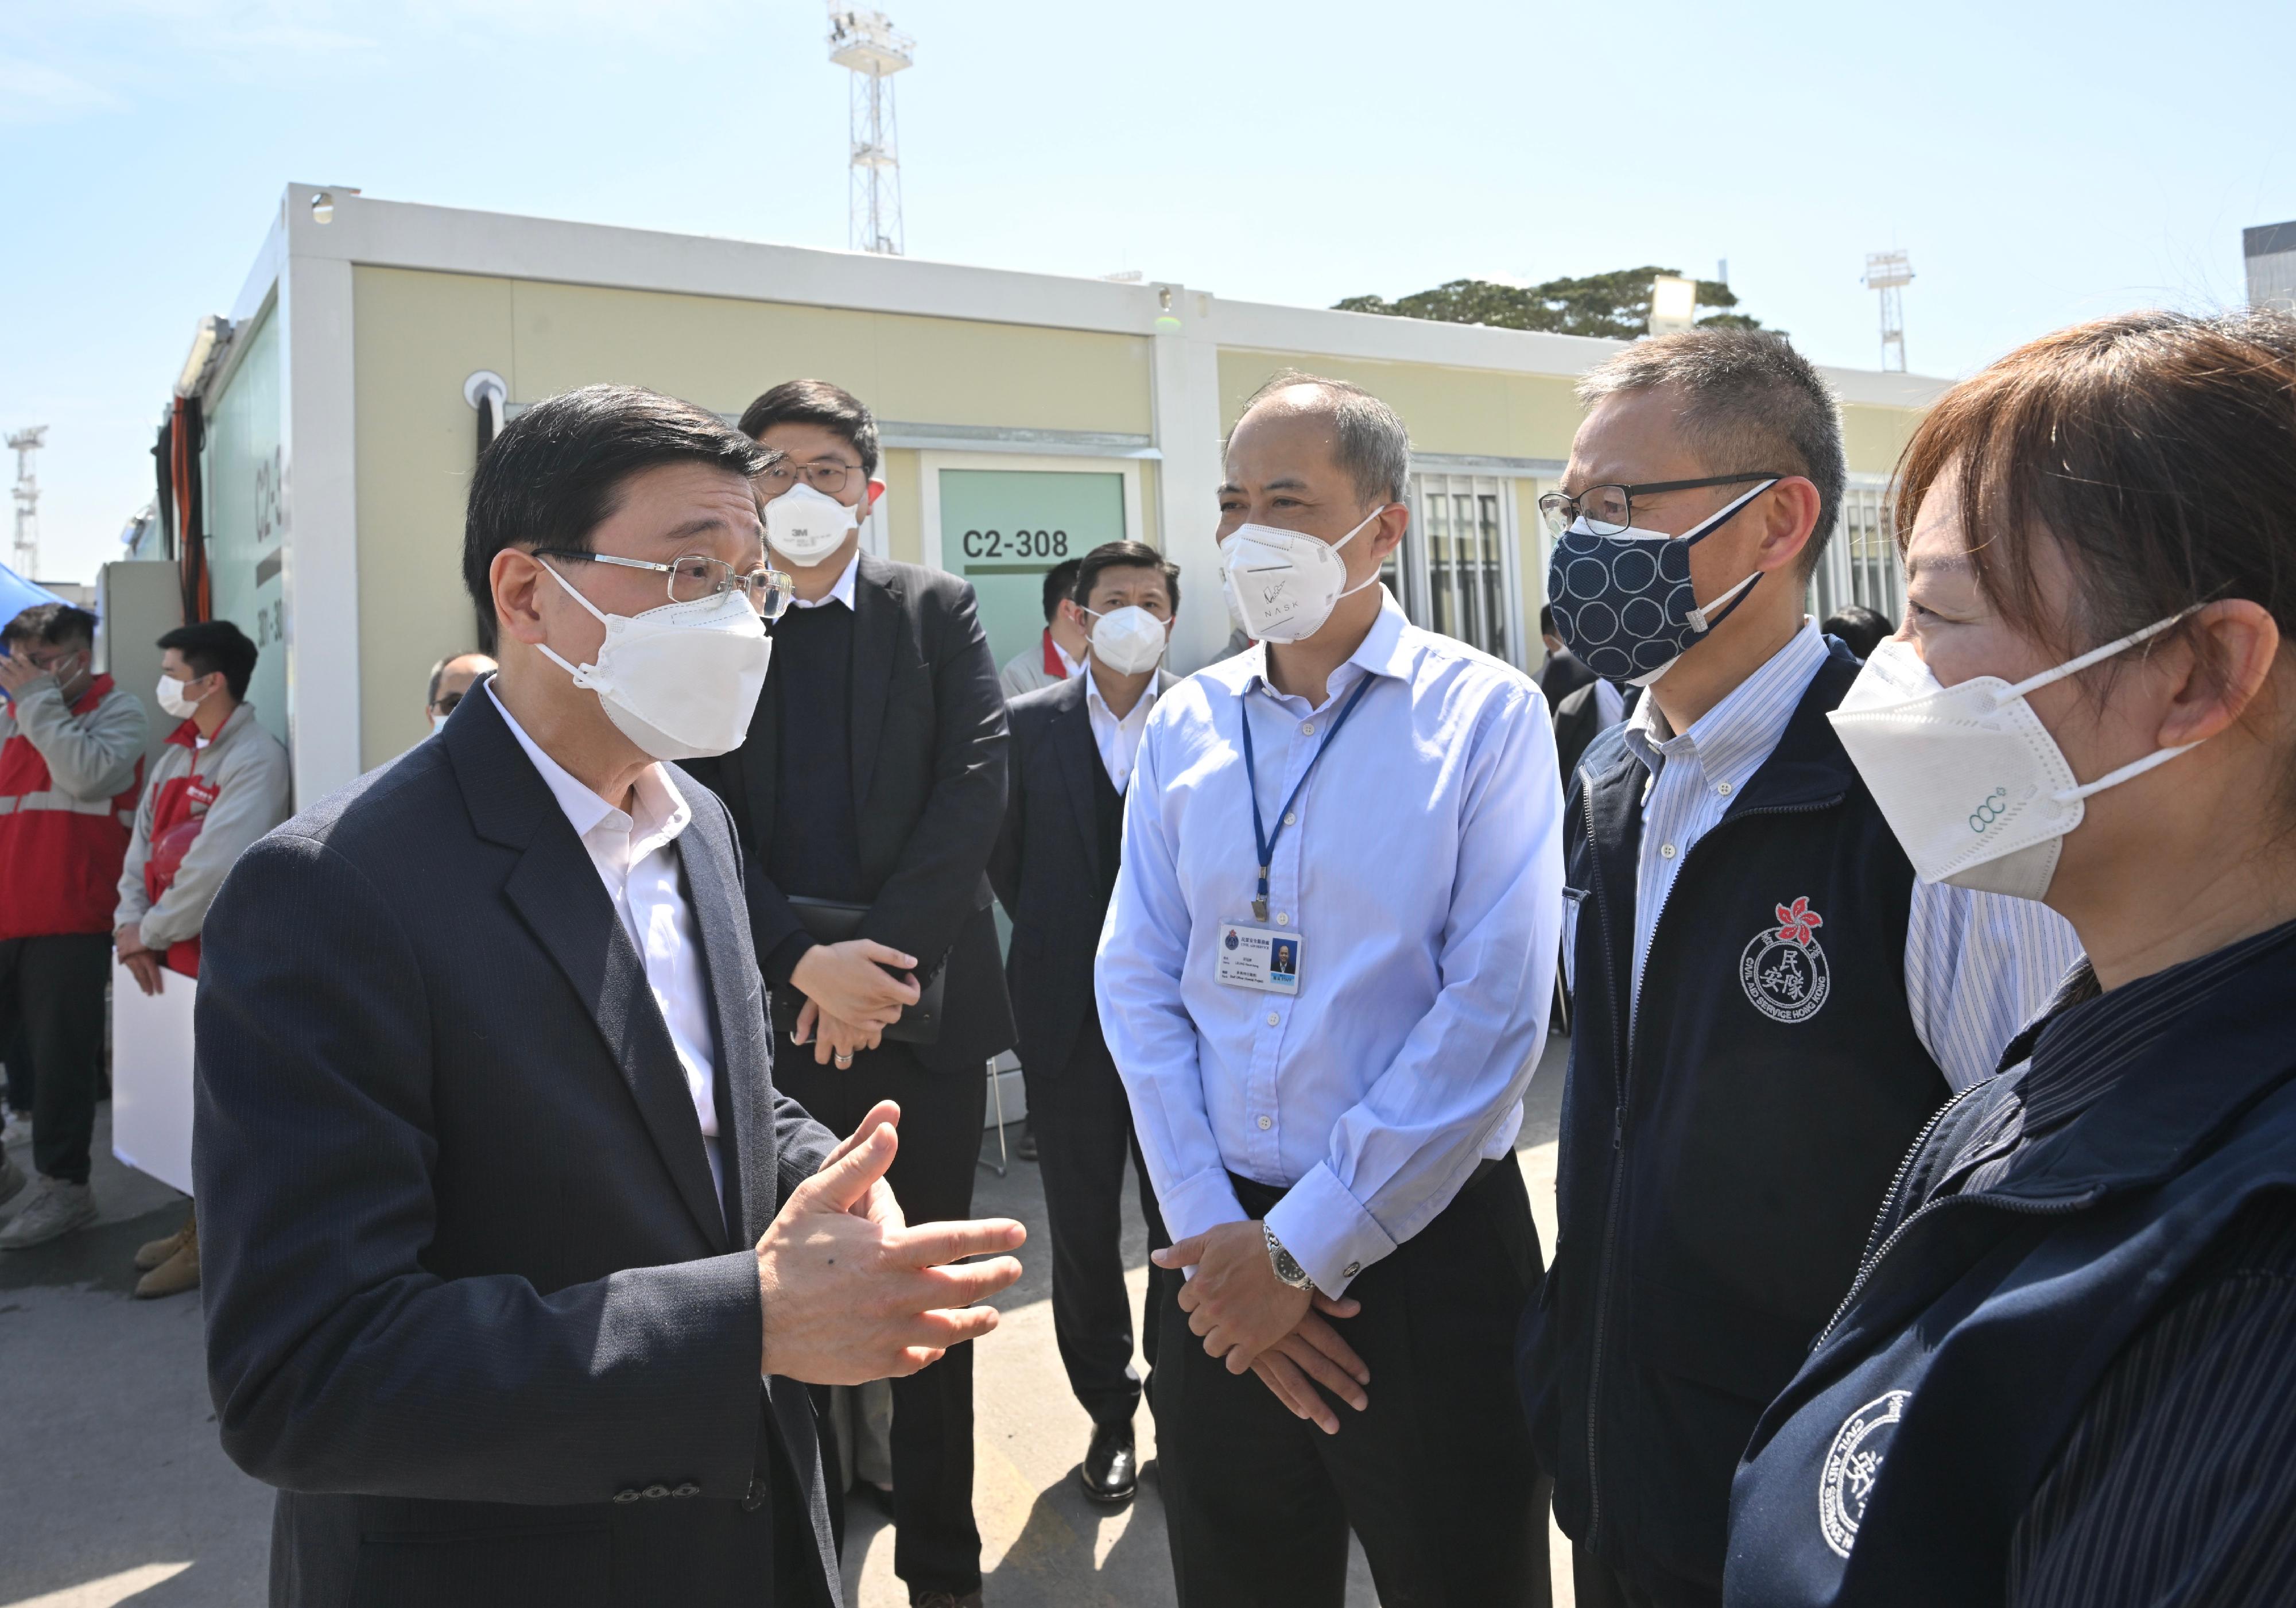 The Chief Secretary for Administration, Mr John Lee, today (March 1) visited the community isolation facilities constructed with the support of the Central Government in Tsing Yi. Photo shows Mr Lee (first left) having a conversation with Civil Aid Service's personnel on site and giving them words of encouragement.